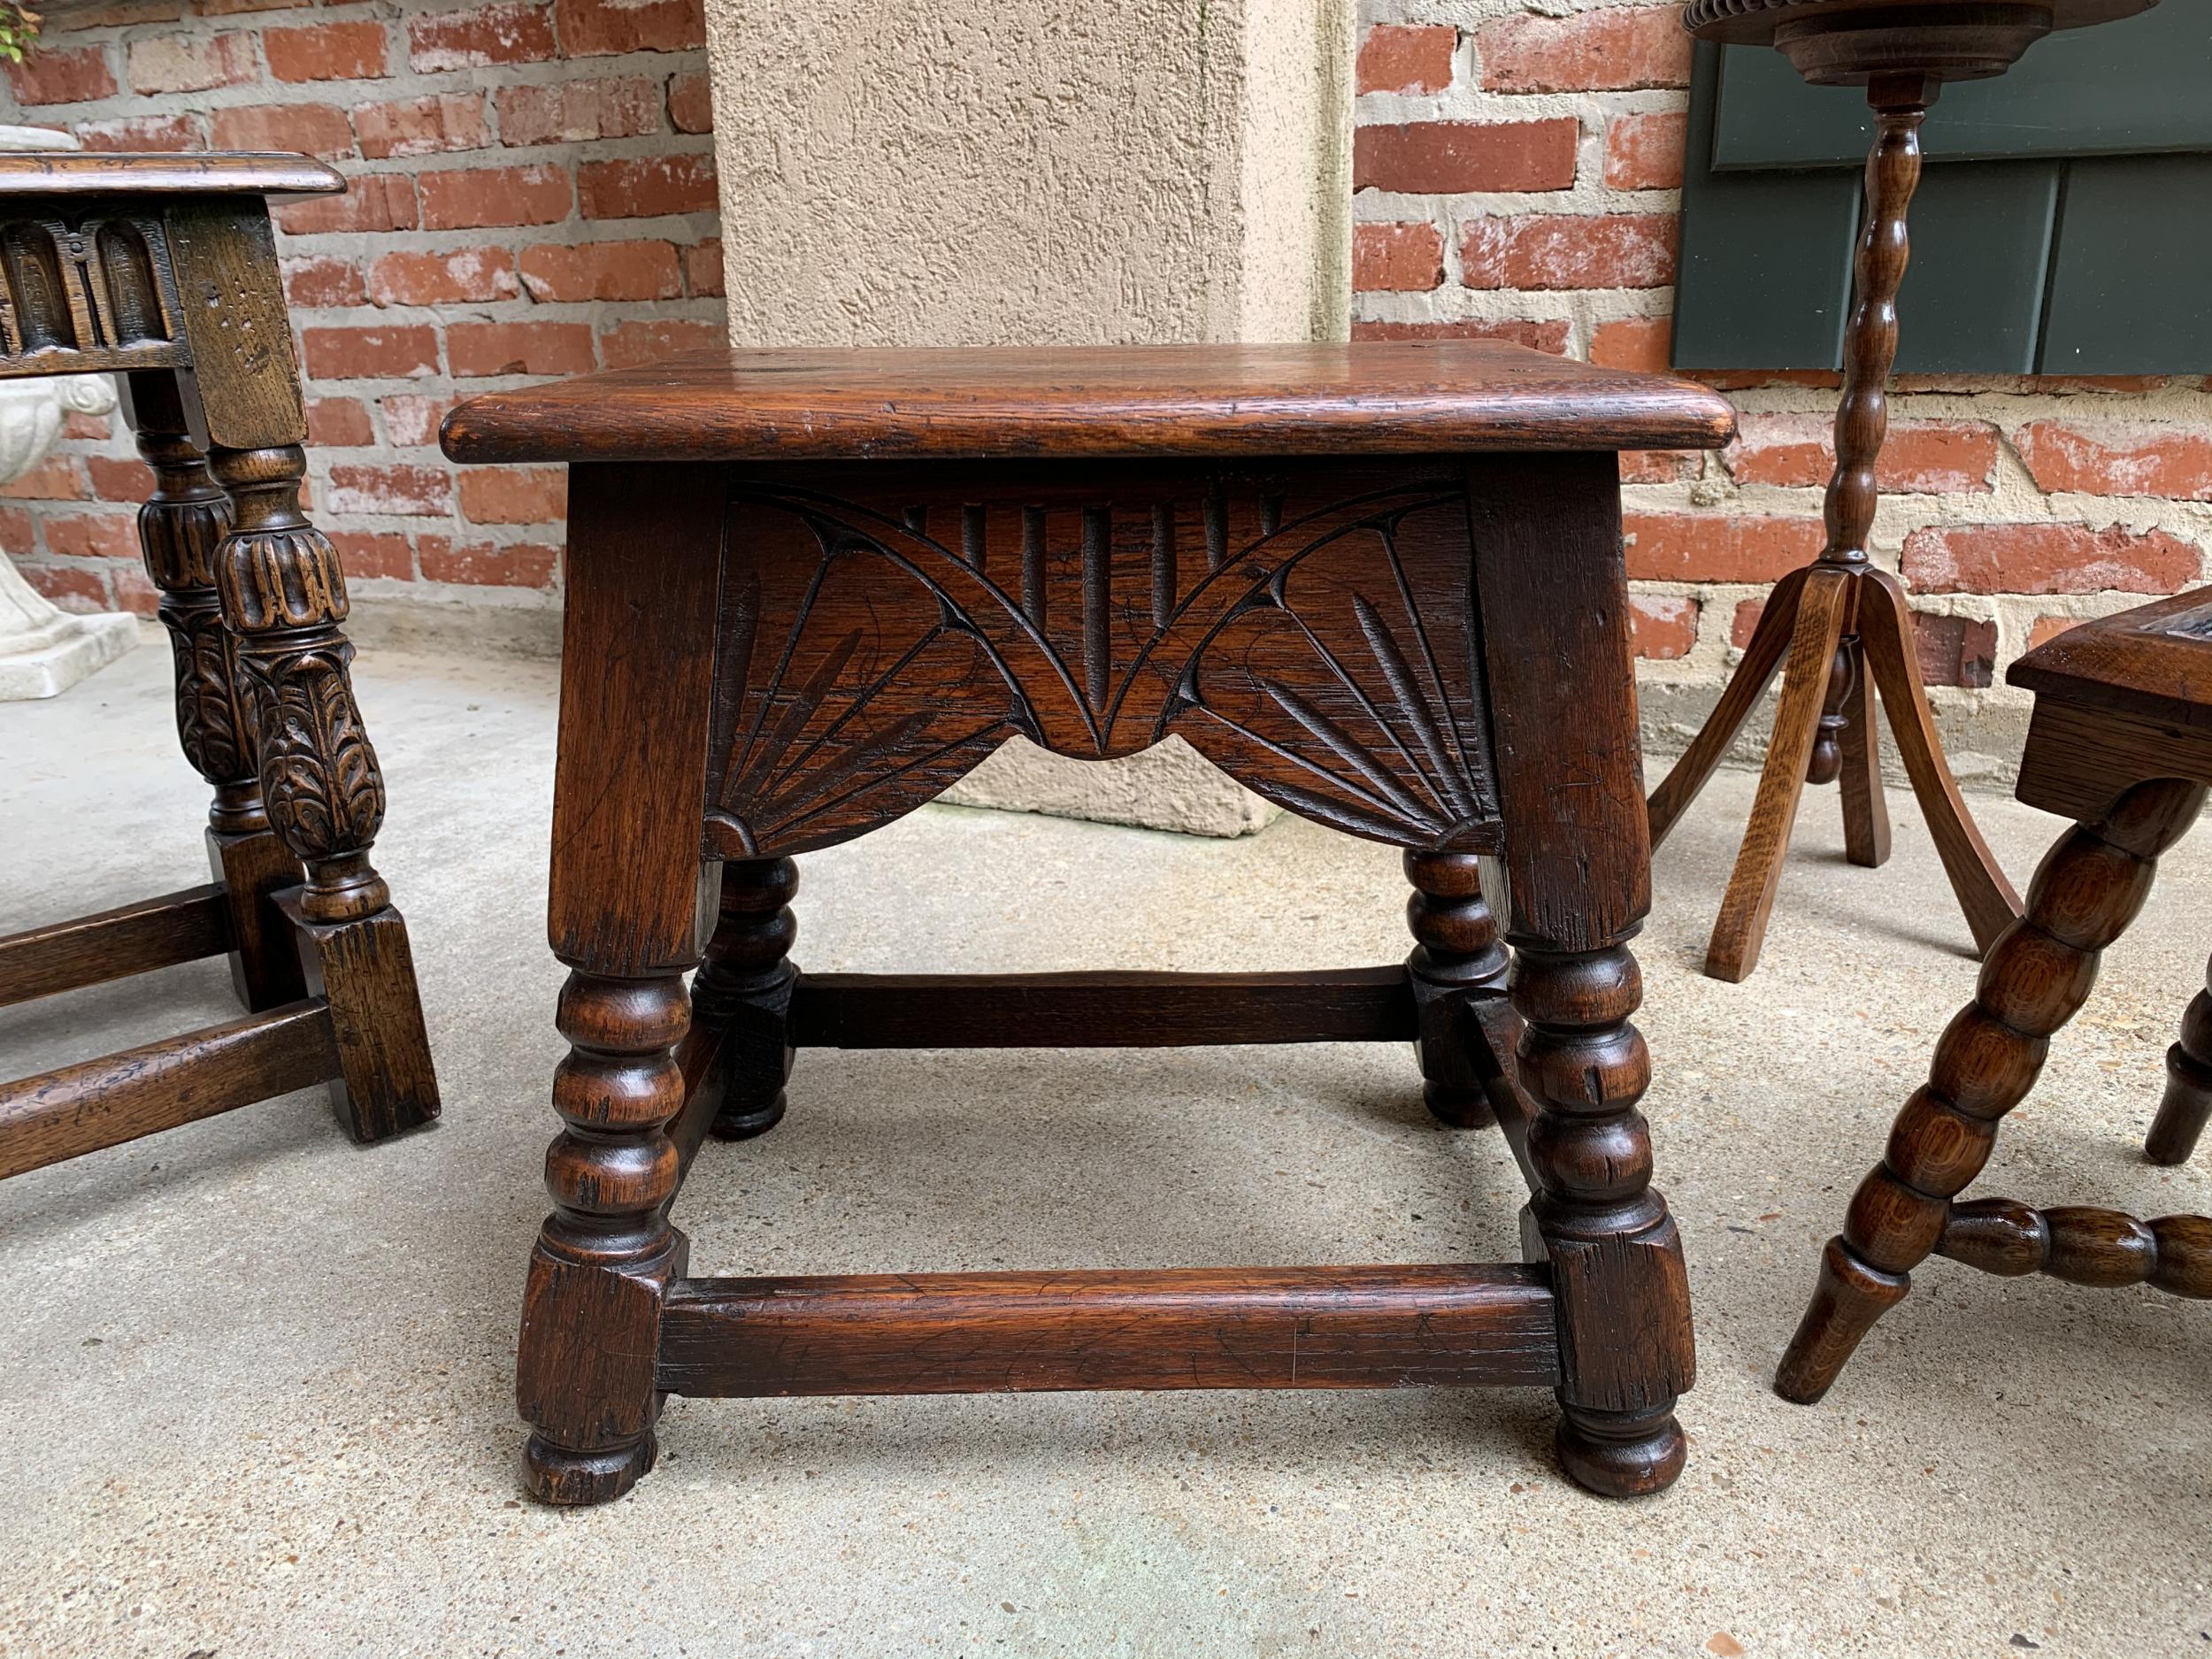 Antique English carved oak bench stool end table Jacobean Joint style

~Direct from England~
~One of several outstanding small carved antique English benches/stools from our latest container!~
~This one is an English “classic”, pegged or joint